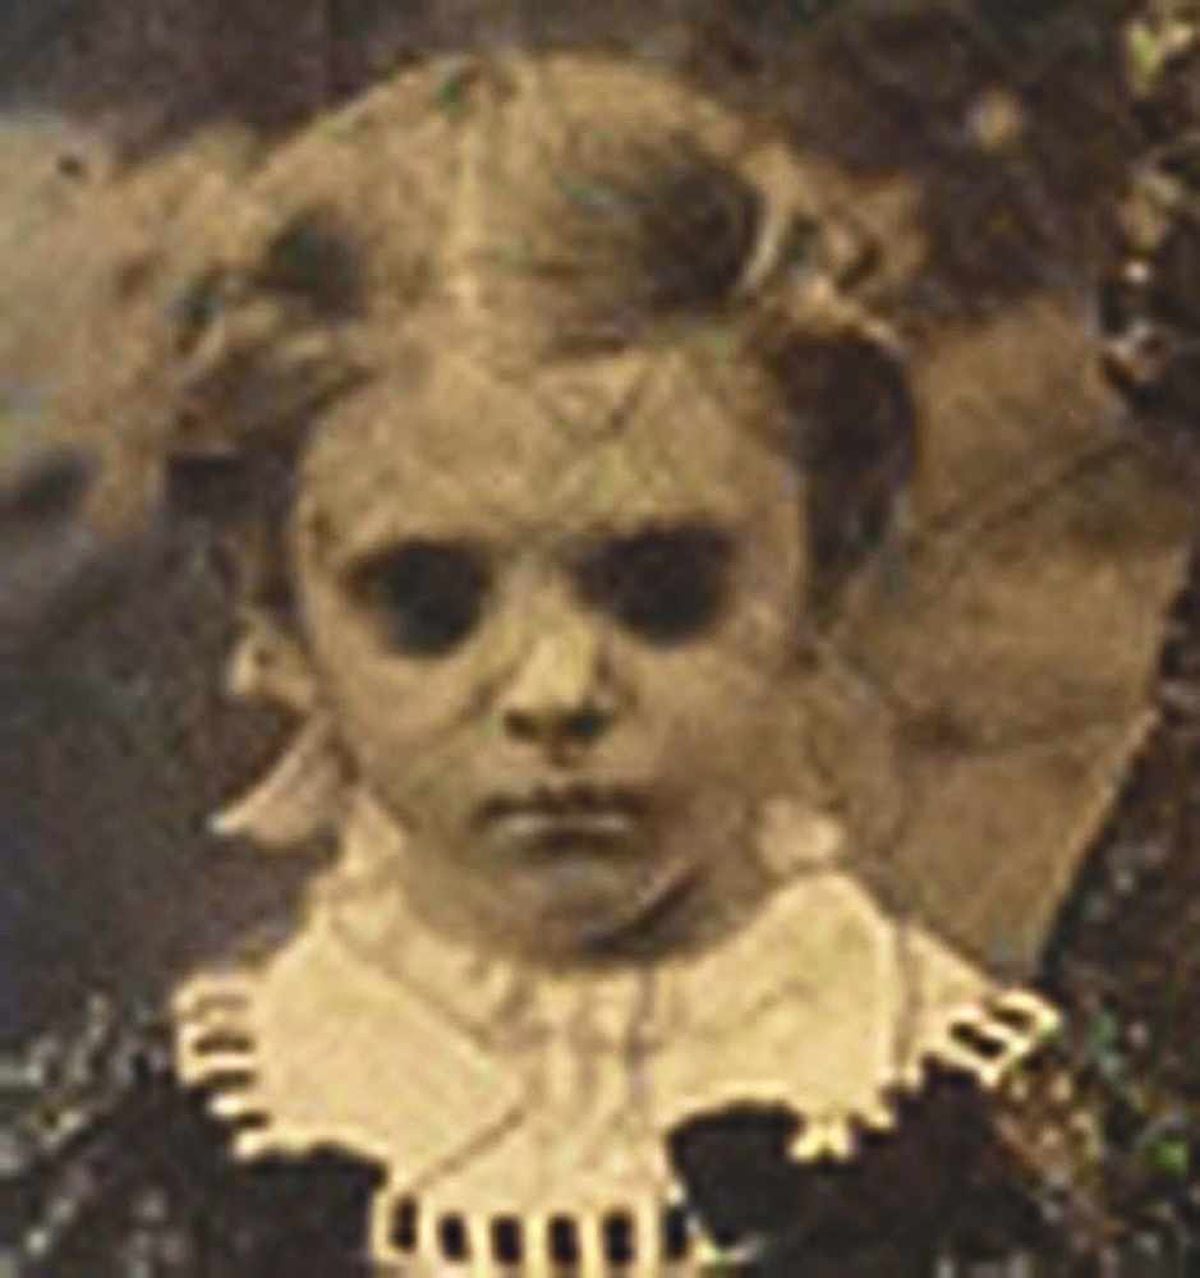 Is it the Black Eyed Child which the camera filmed?